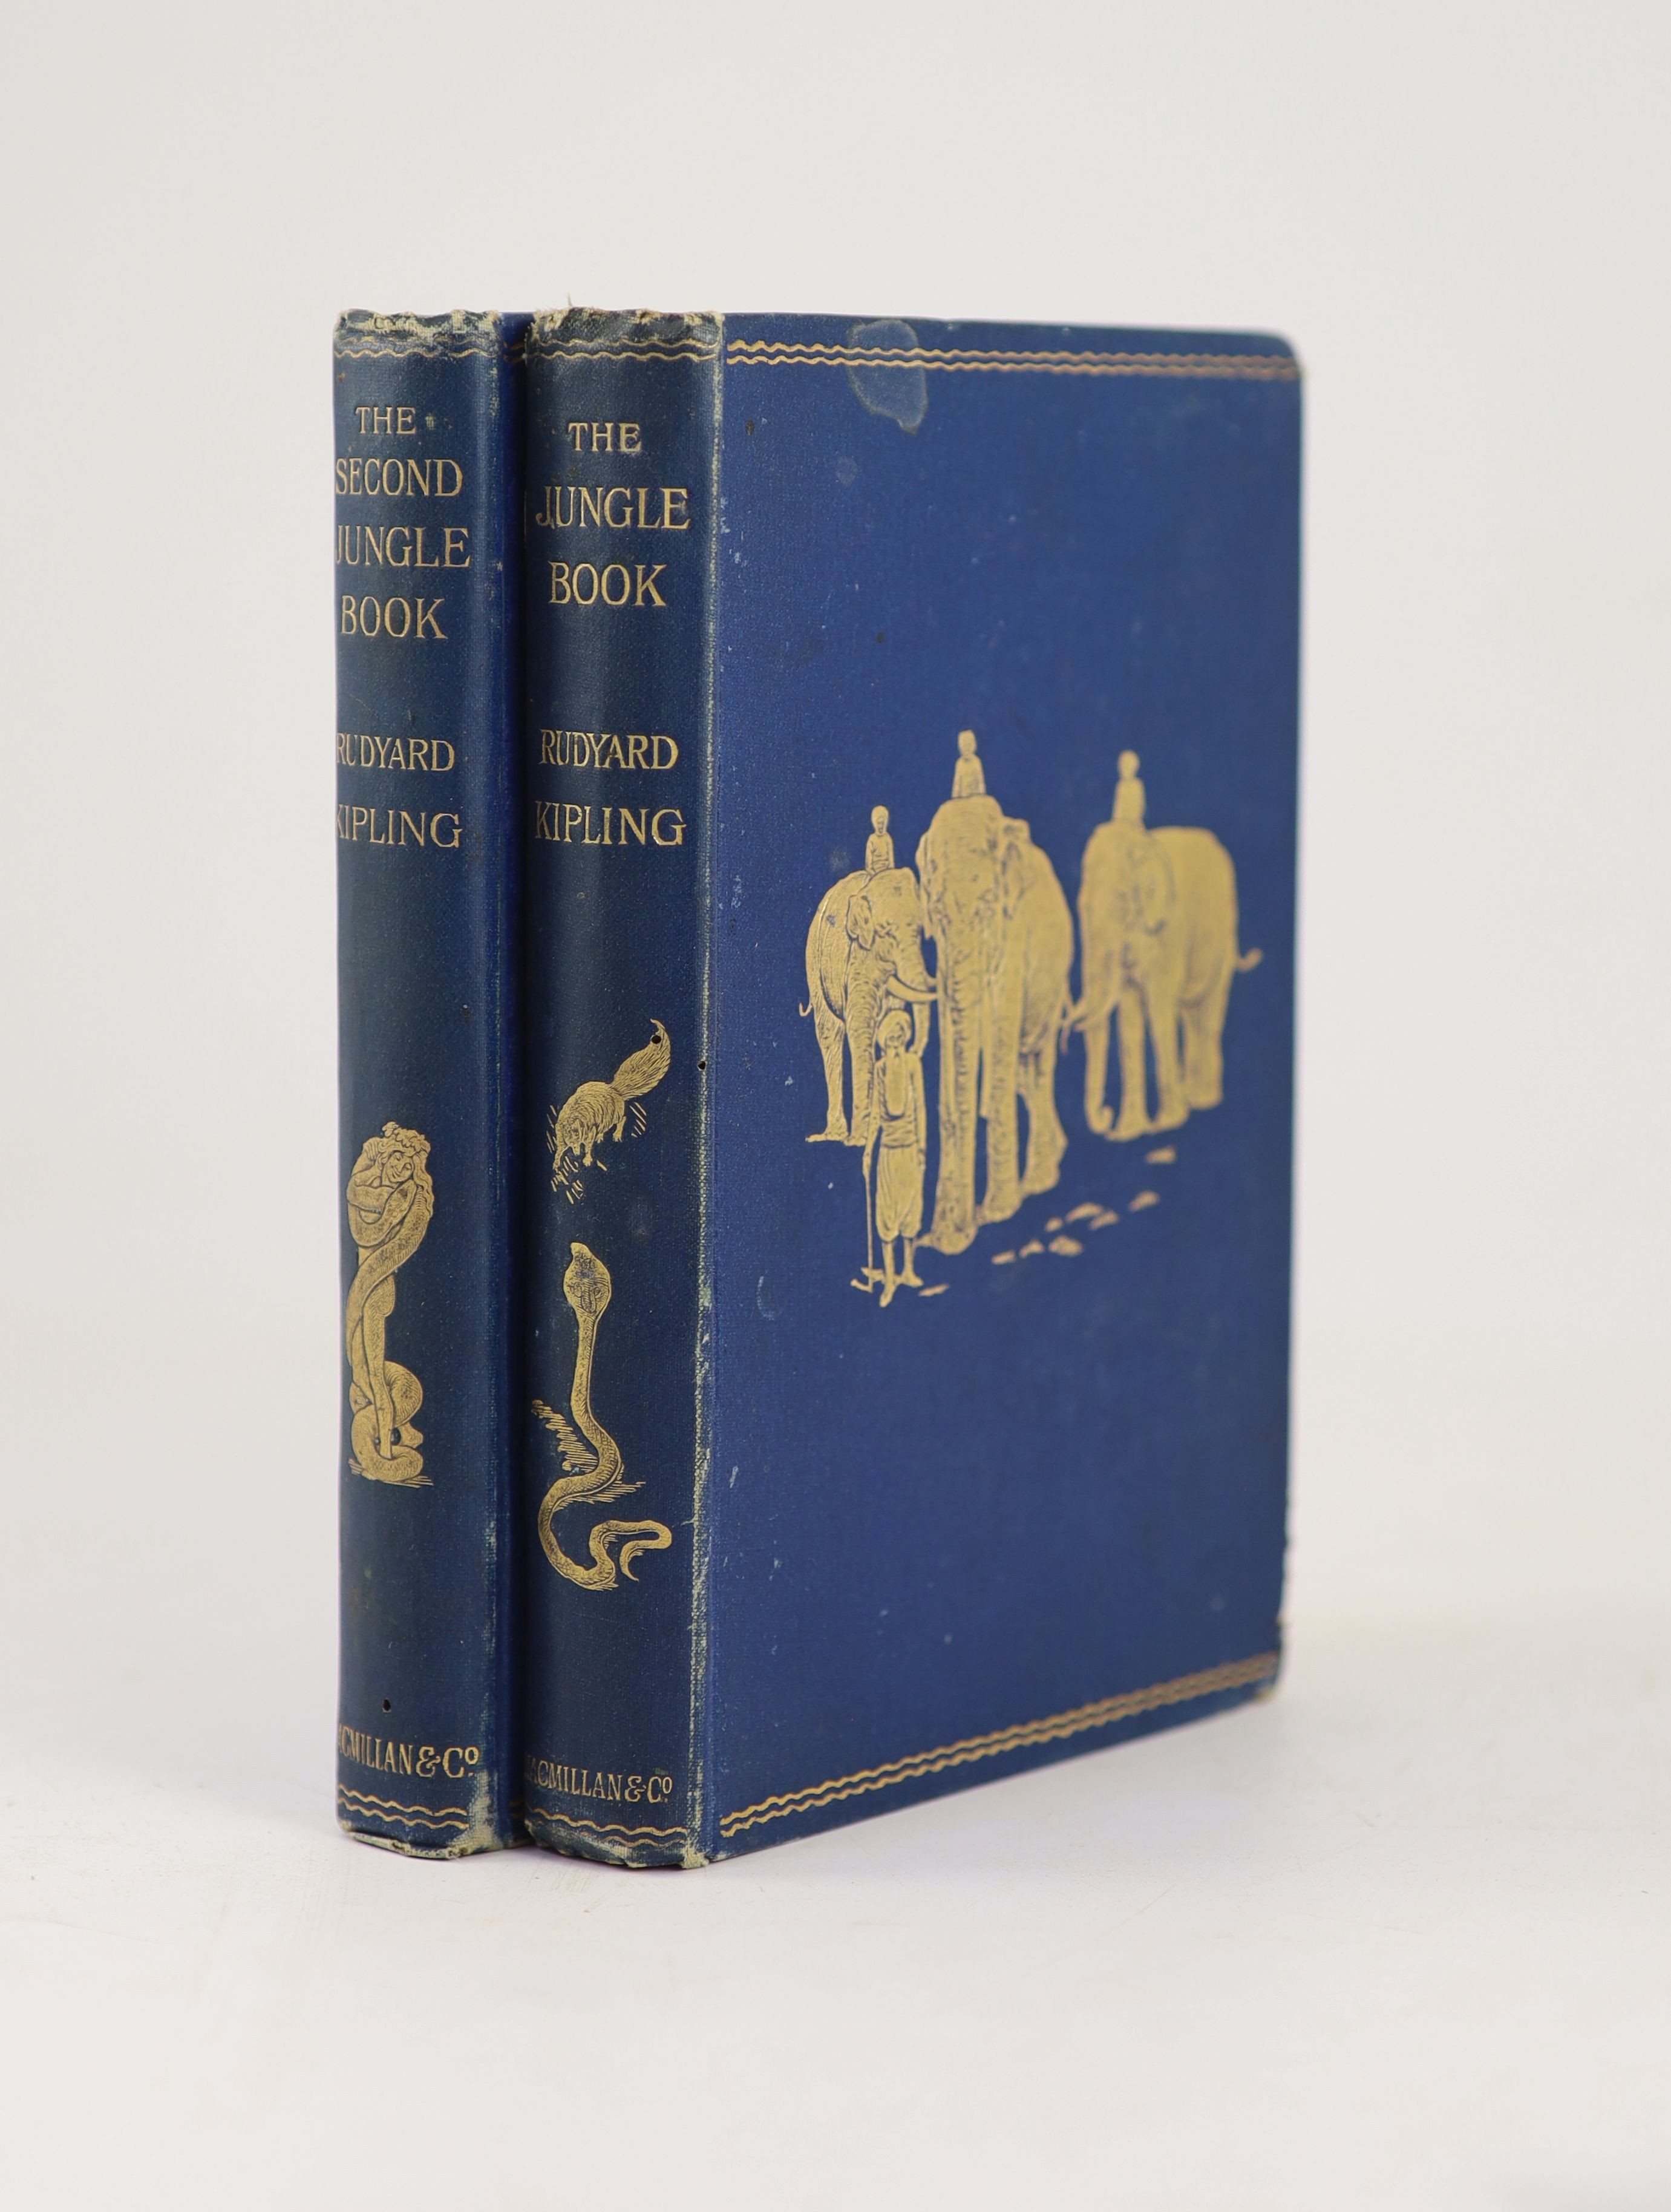 ° Kipling, Rudyard - The Jungle Book. With: The Second Jungle Book, 2 vols, (Jungle Book 1st